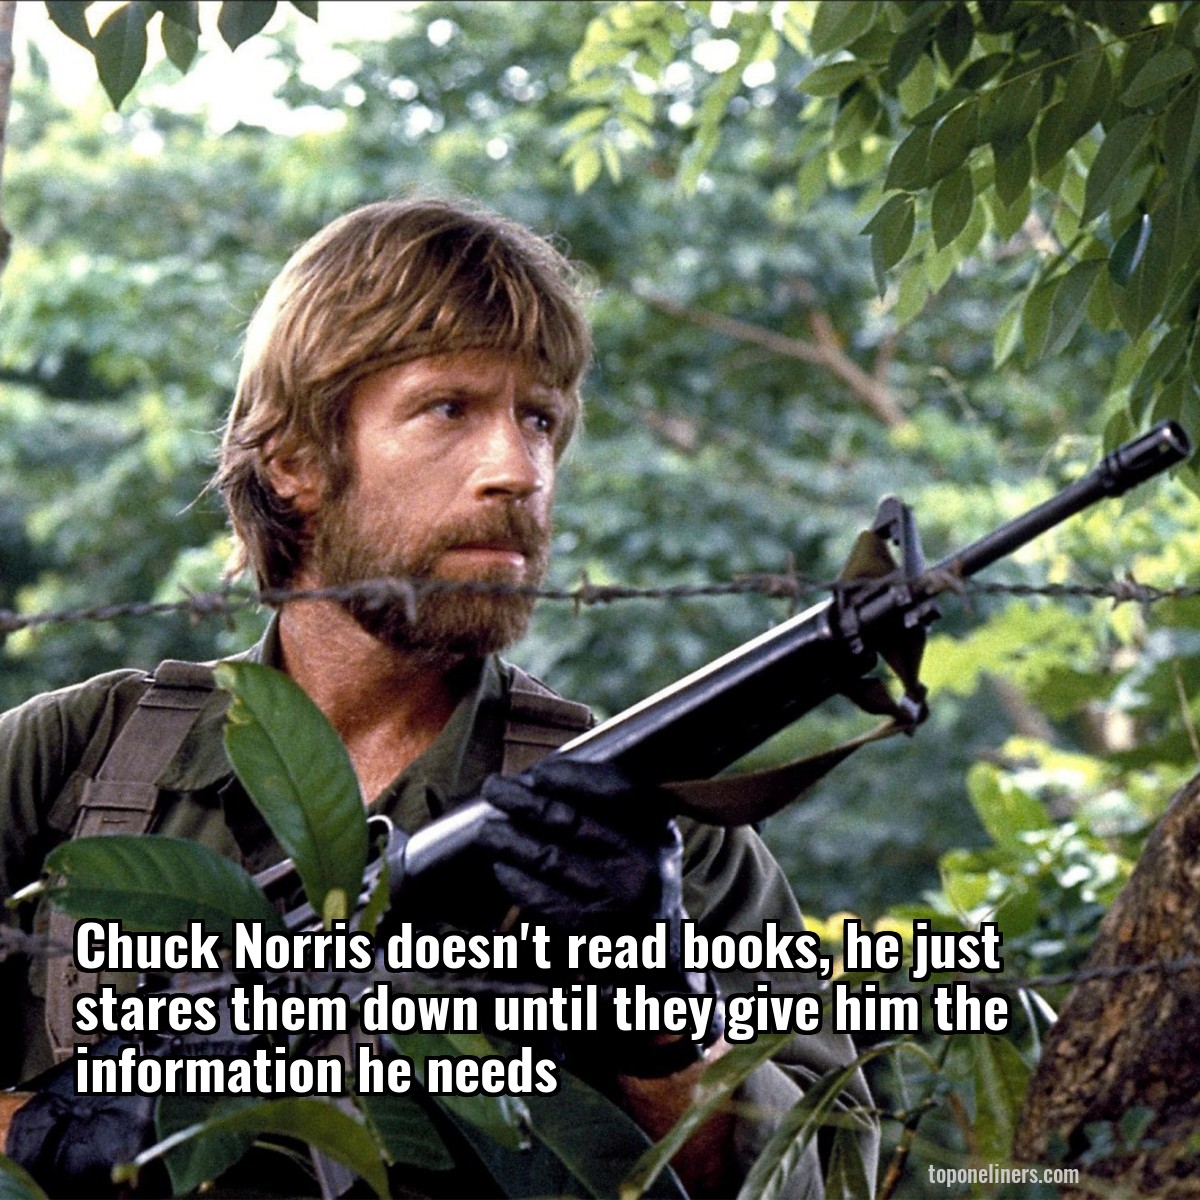 Chuck Norris doesn't read books, he just stares them down until they give him the information he needs